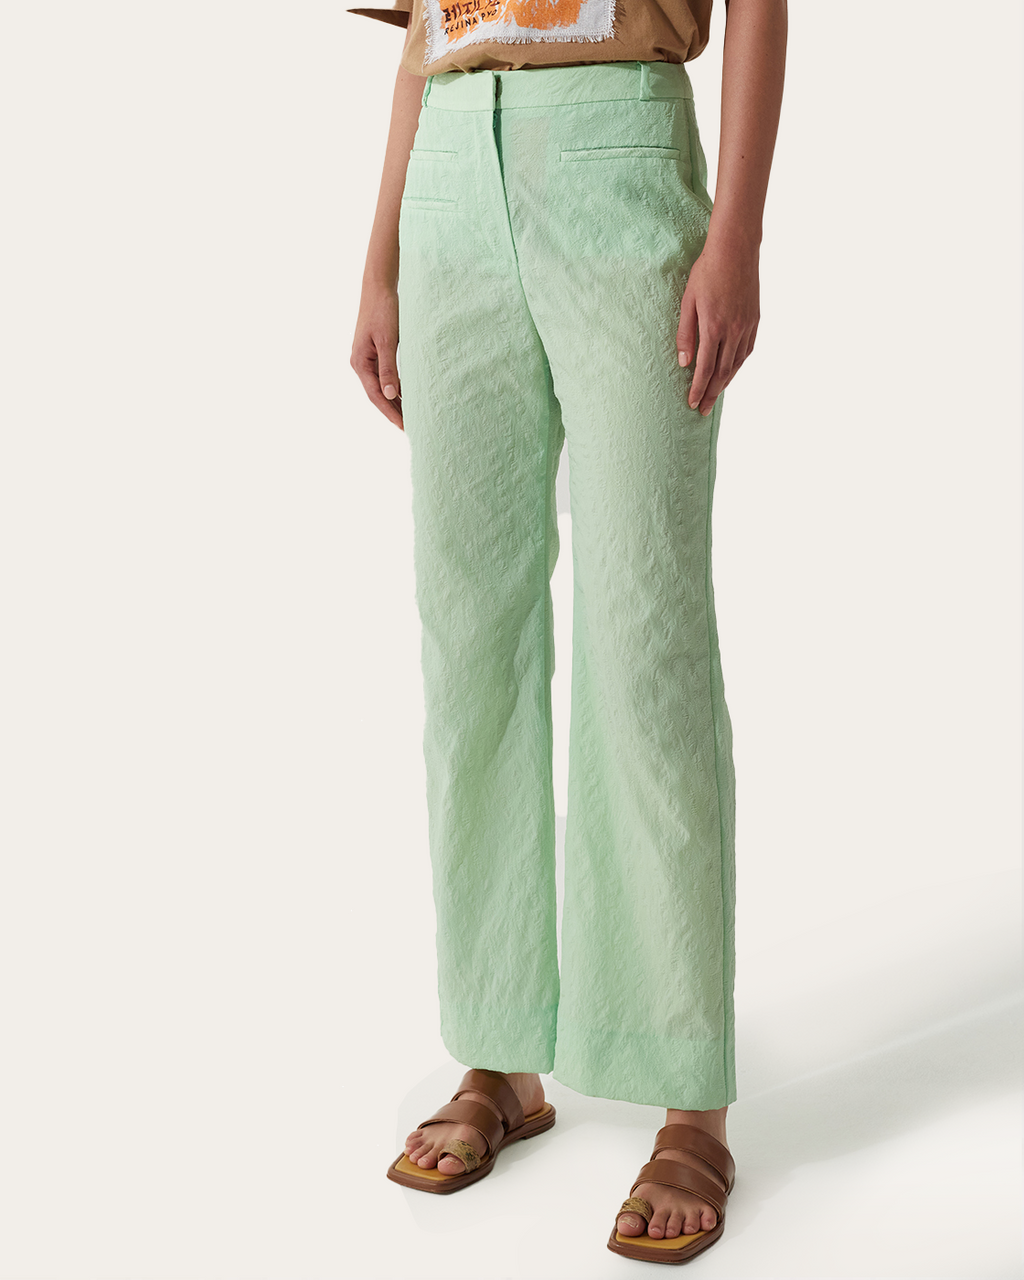 Aletta Trousers Textured Viscose Apple Green - Special Price